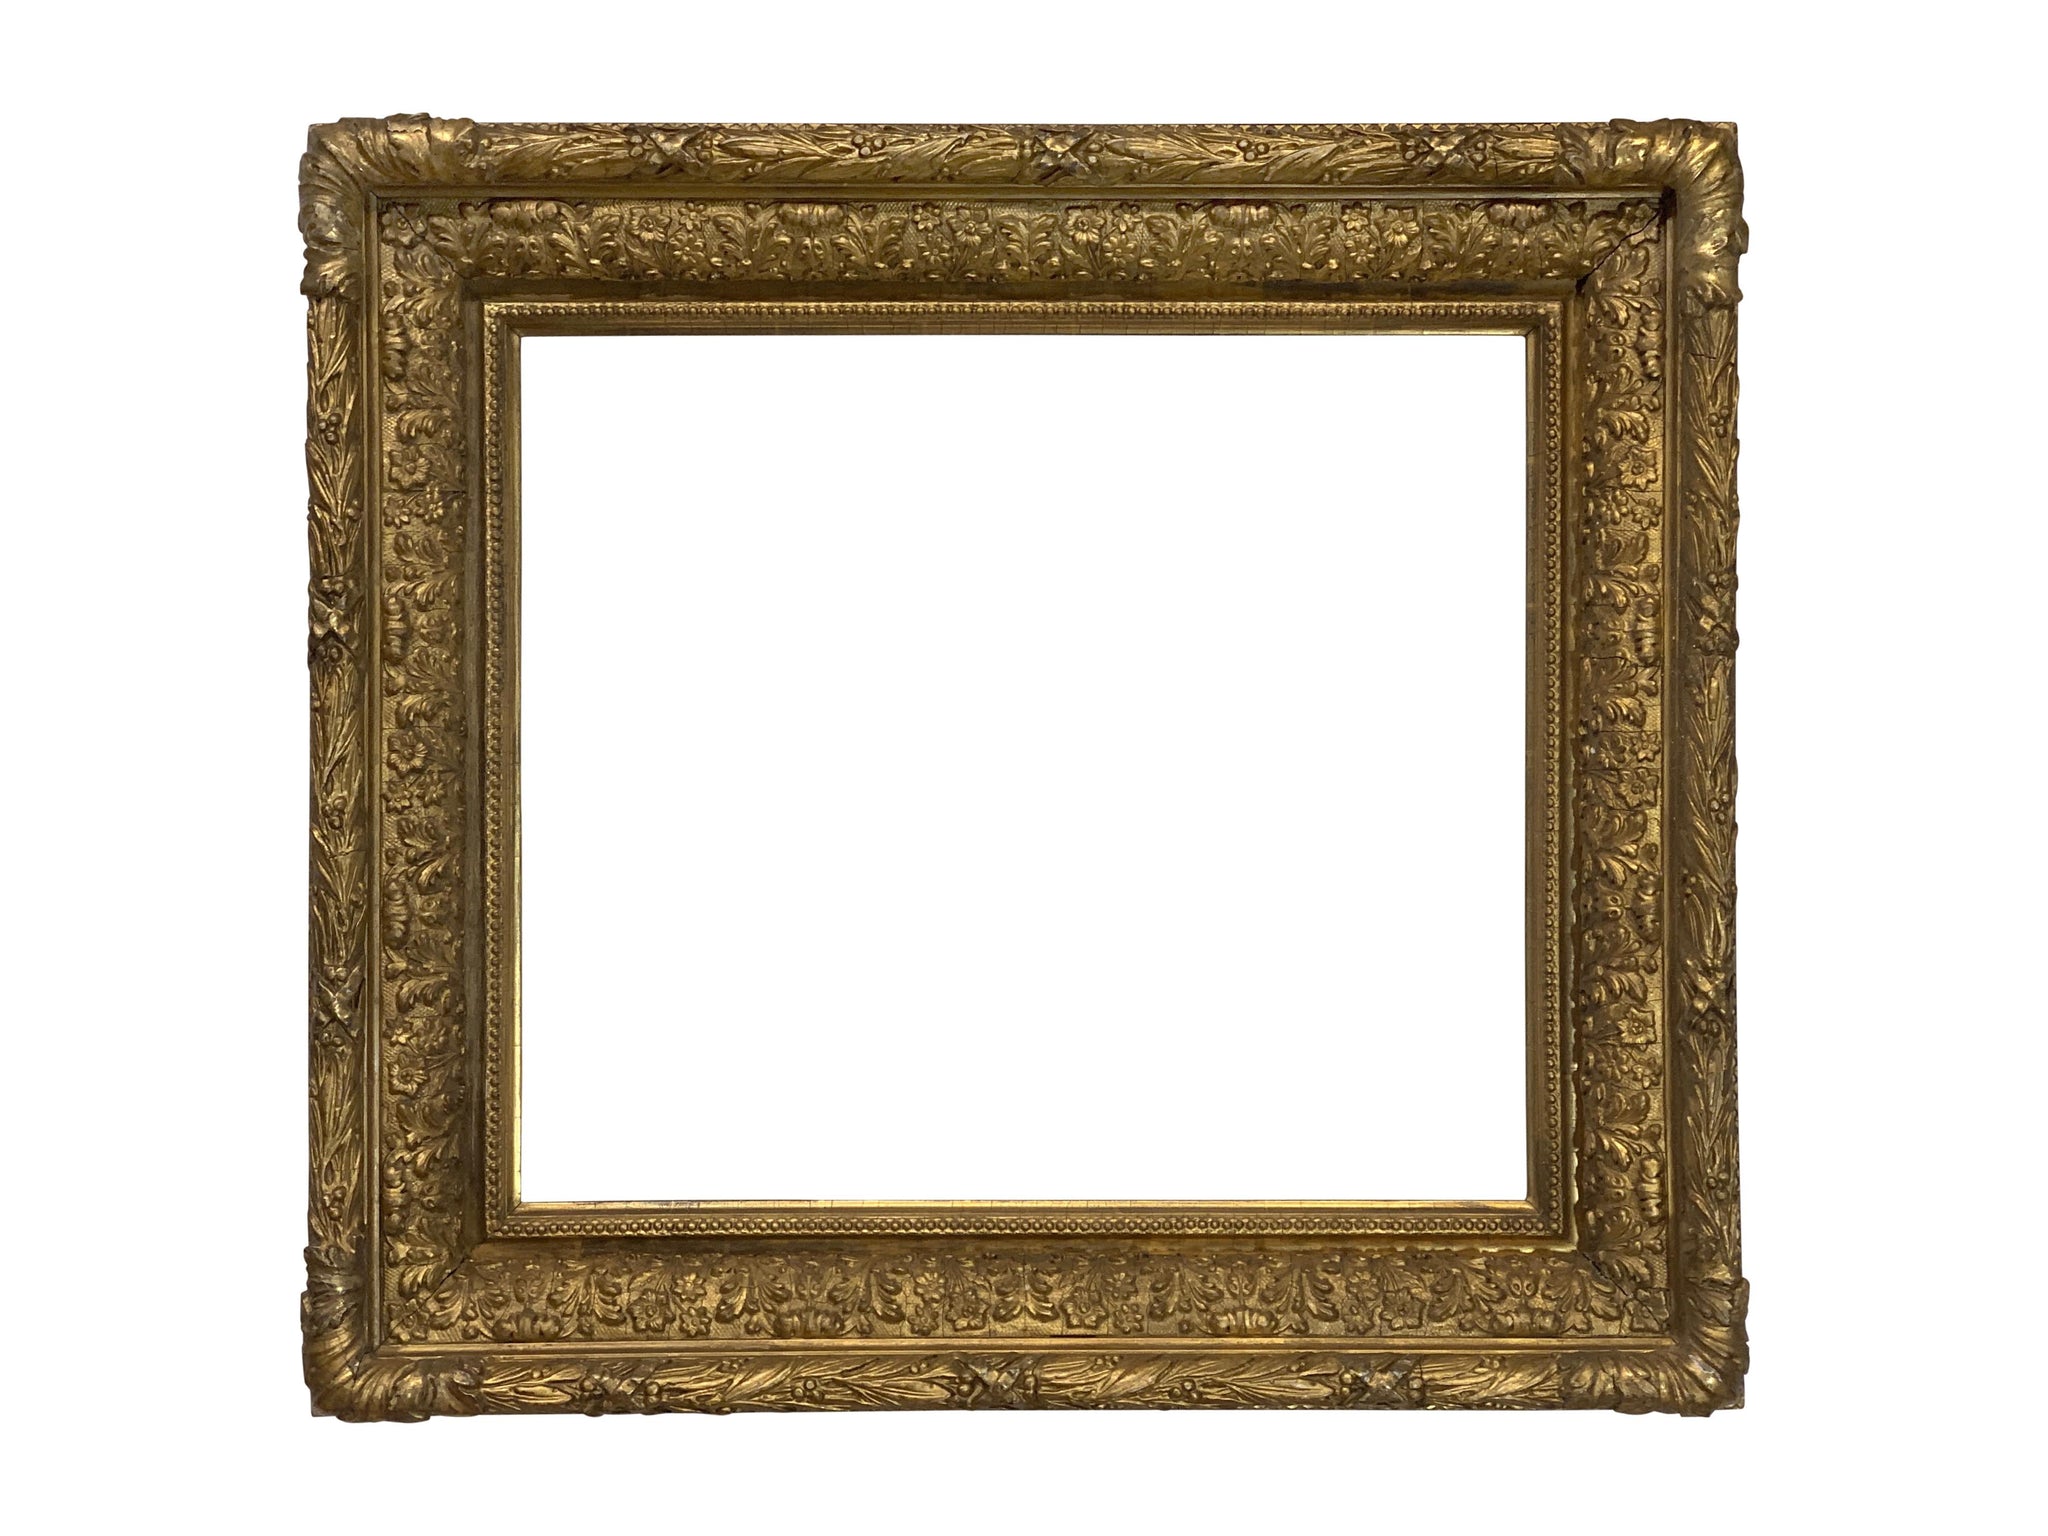 American 19x22 inch Ornate Antique Gold Picture Frame for canvas art circa 1880 (19th century).